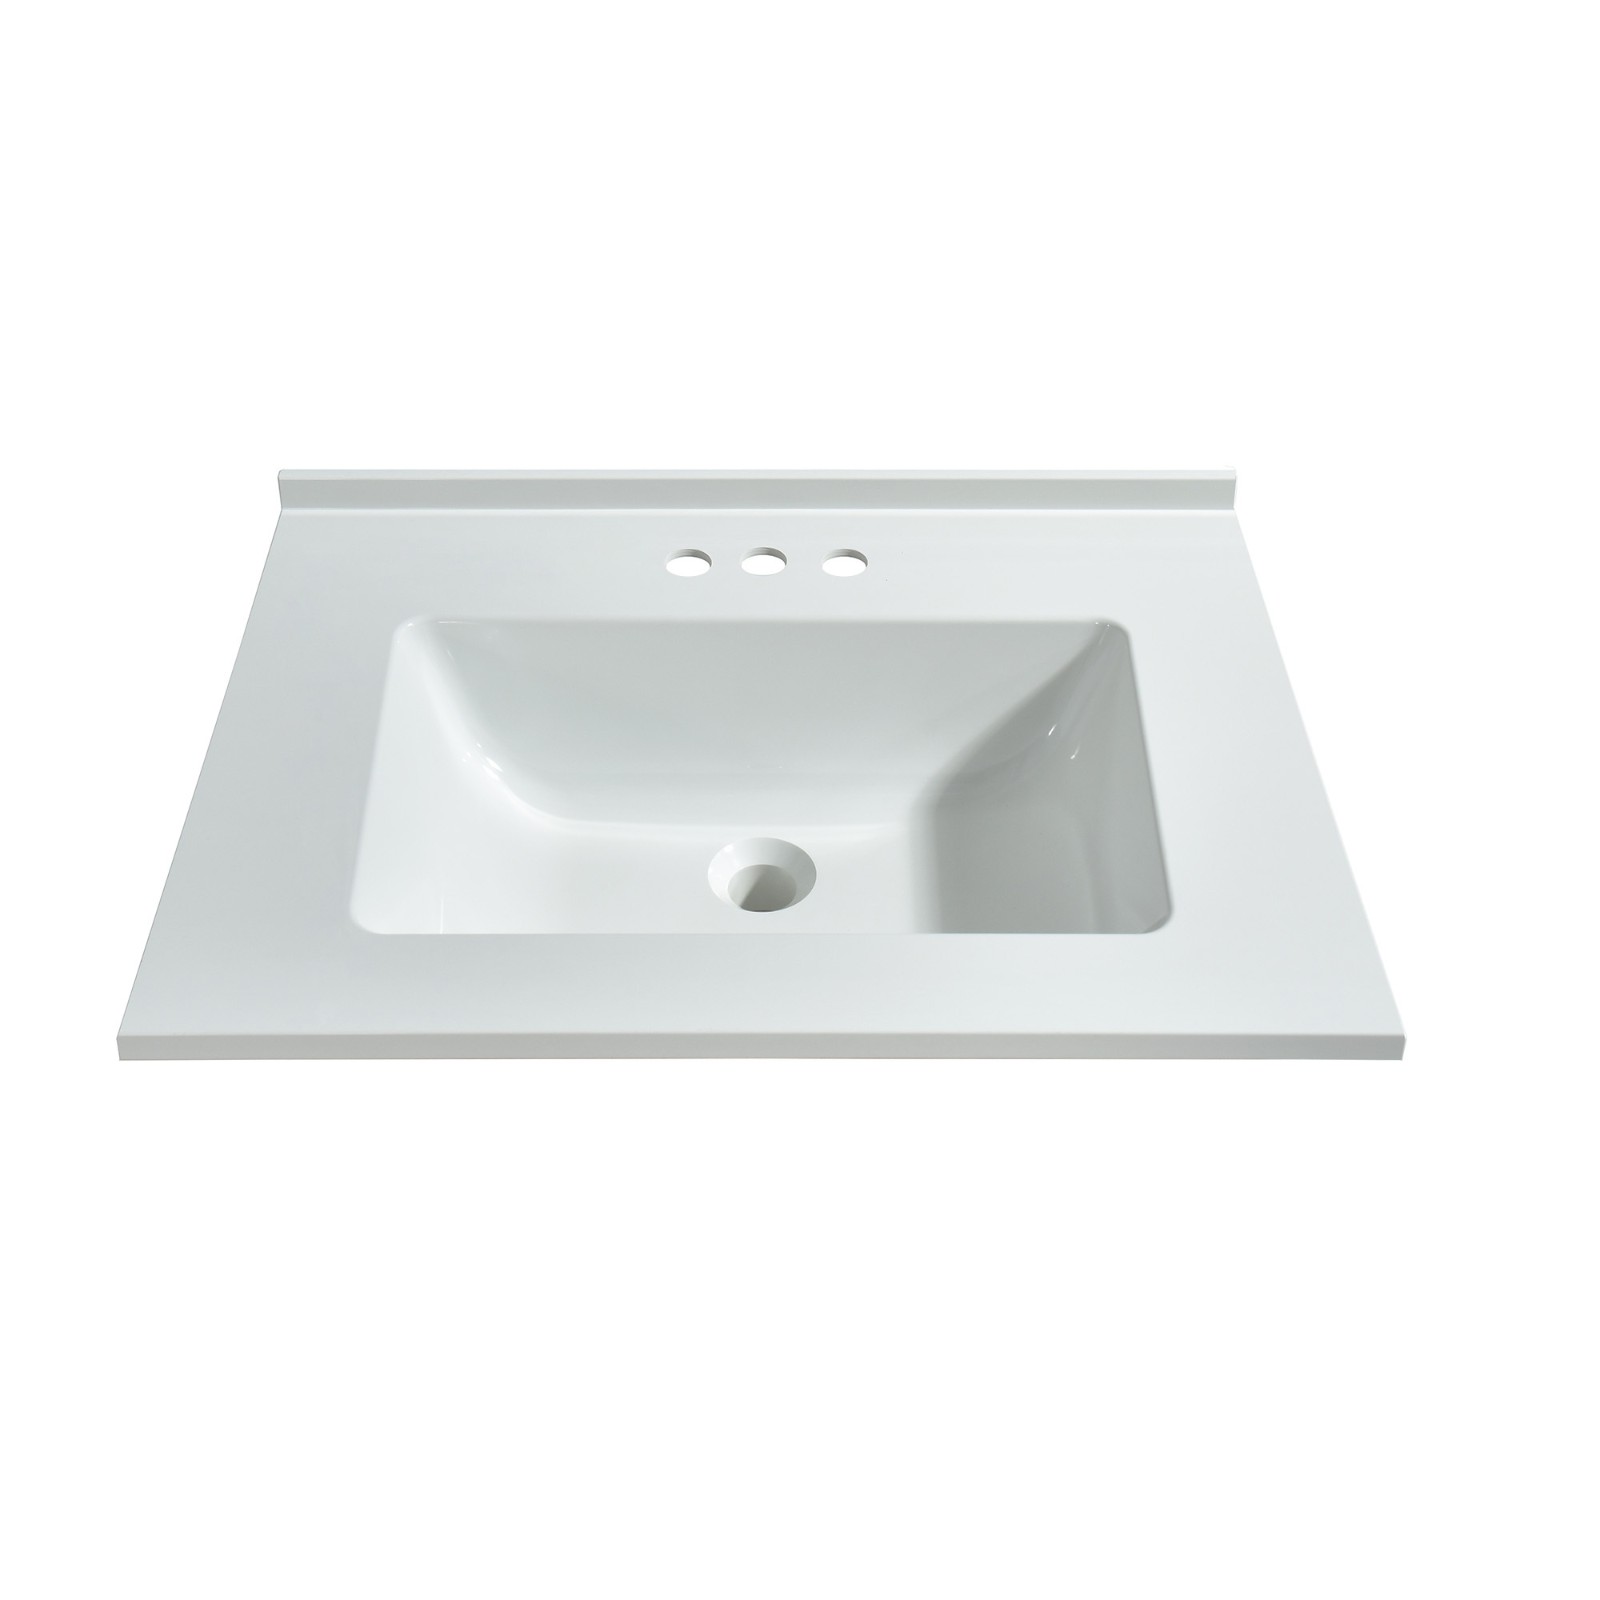  WOODBRIDGE VT3122-1008 Solid Surface Vanity Top with with Intergrated Sink and 3 Faucet Holes for 8-Inch Widespread Faucet, 31